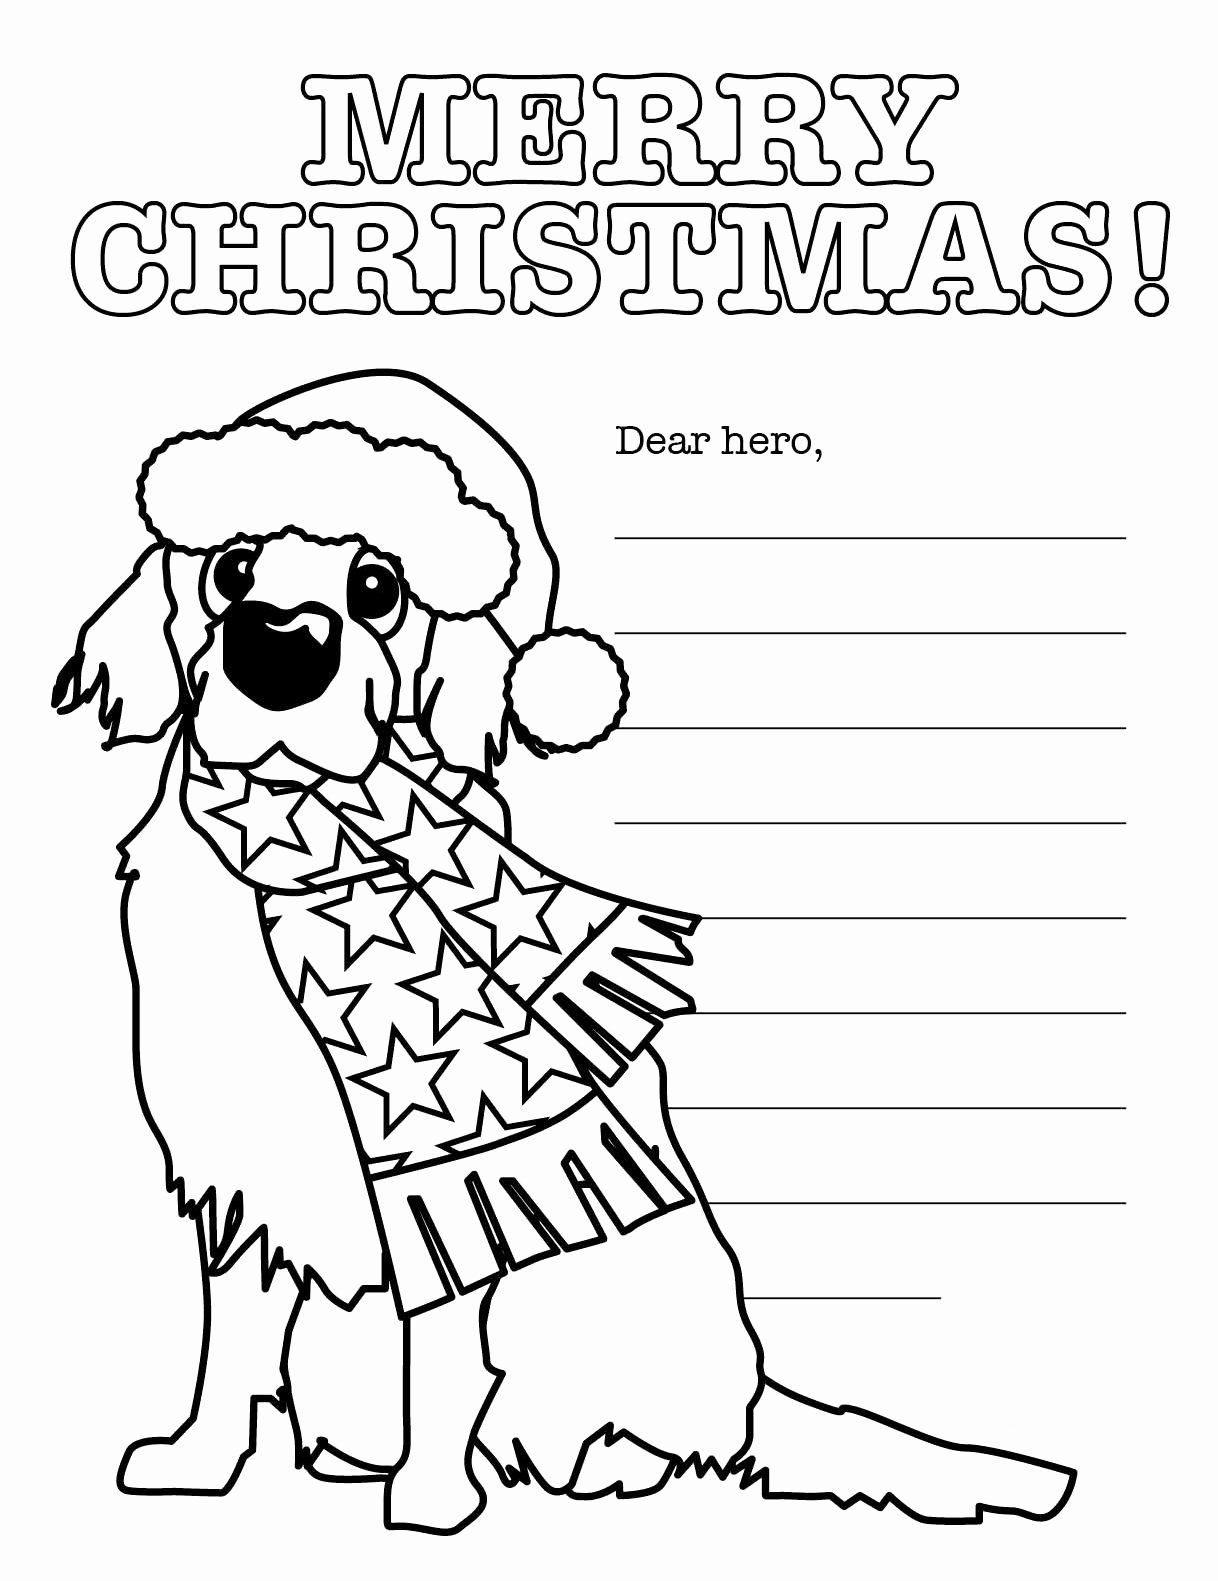 Free Printable Military Greeting Cards Inspirational Christmas Cards for Greeting Sign Coloring Pages